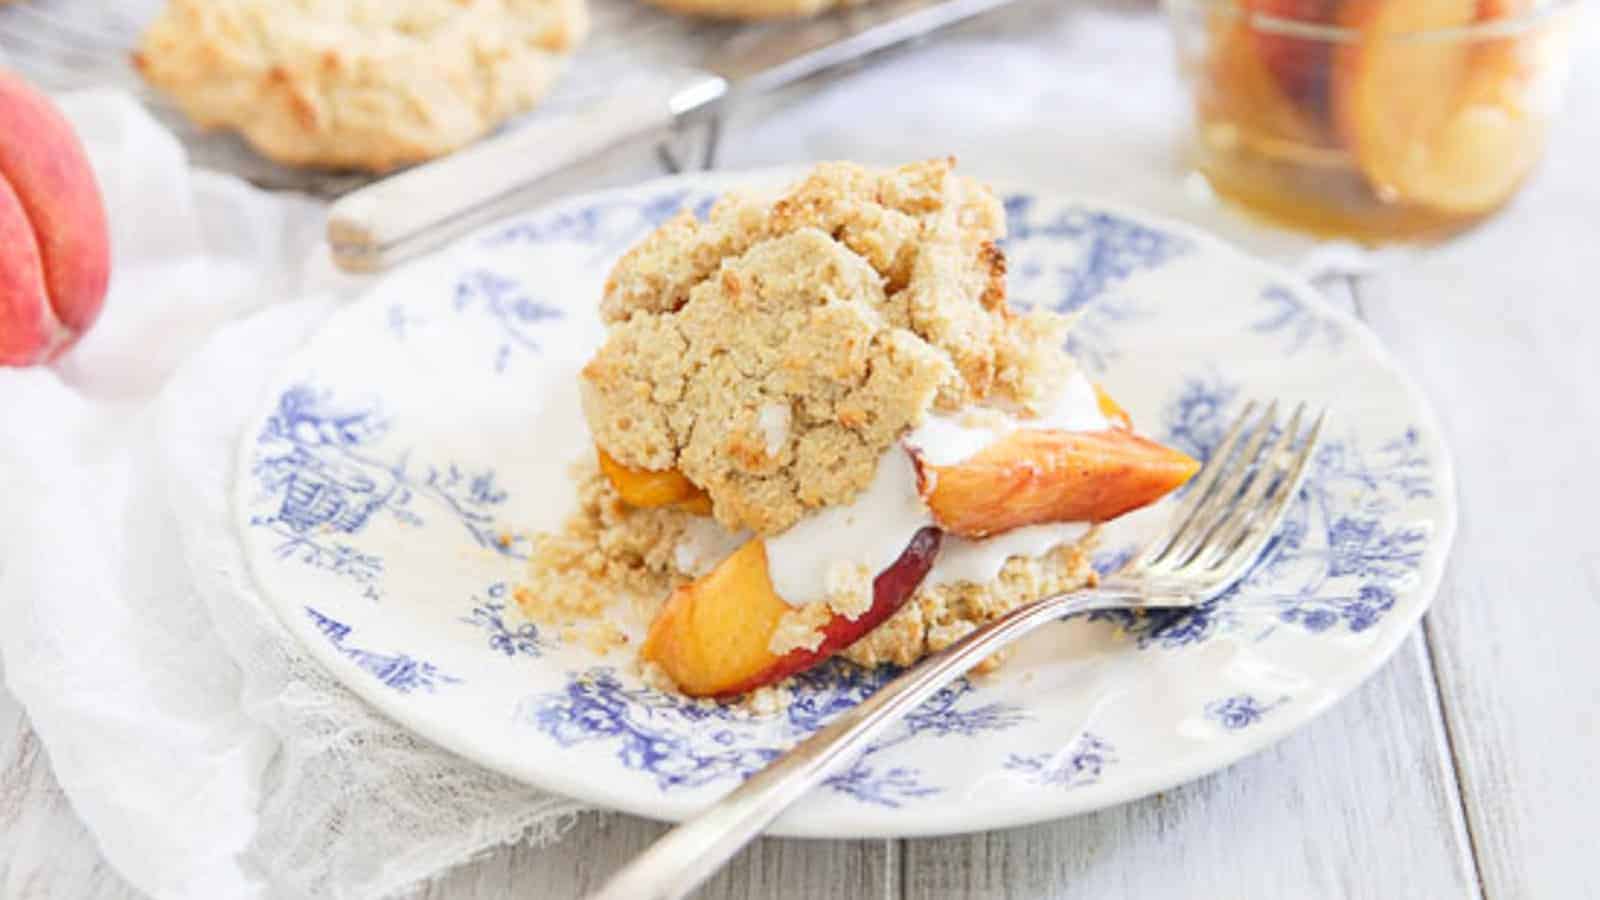 Peach shortcake on a blue and white plate with a fork.